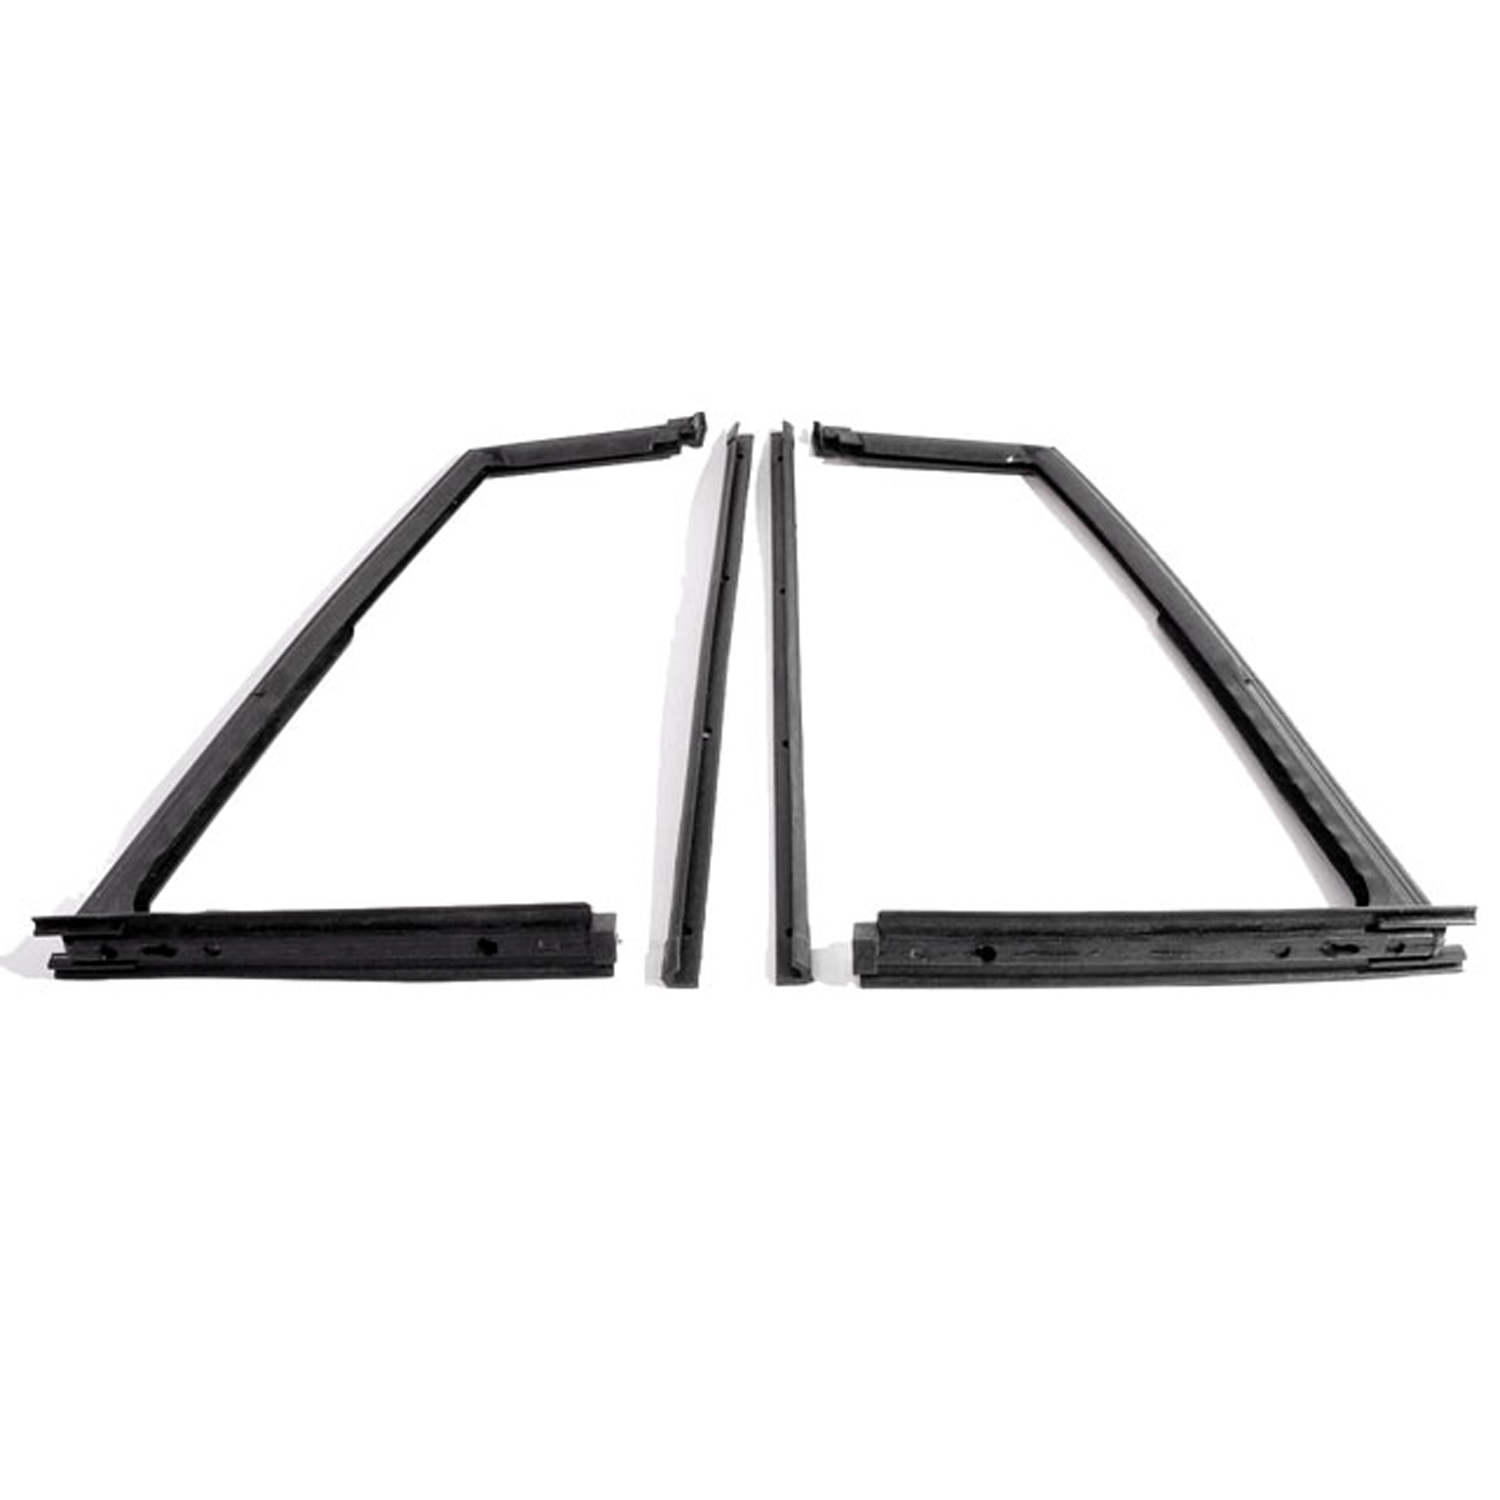 1967 Jeep Jeepster Vent Window Seals.  Pair-WR 9700